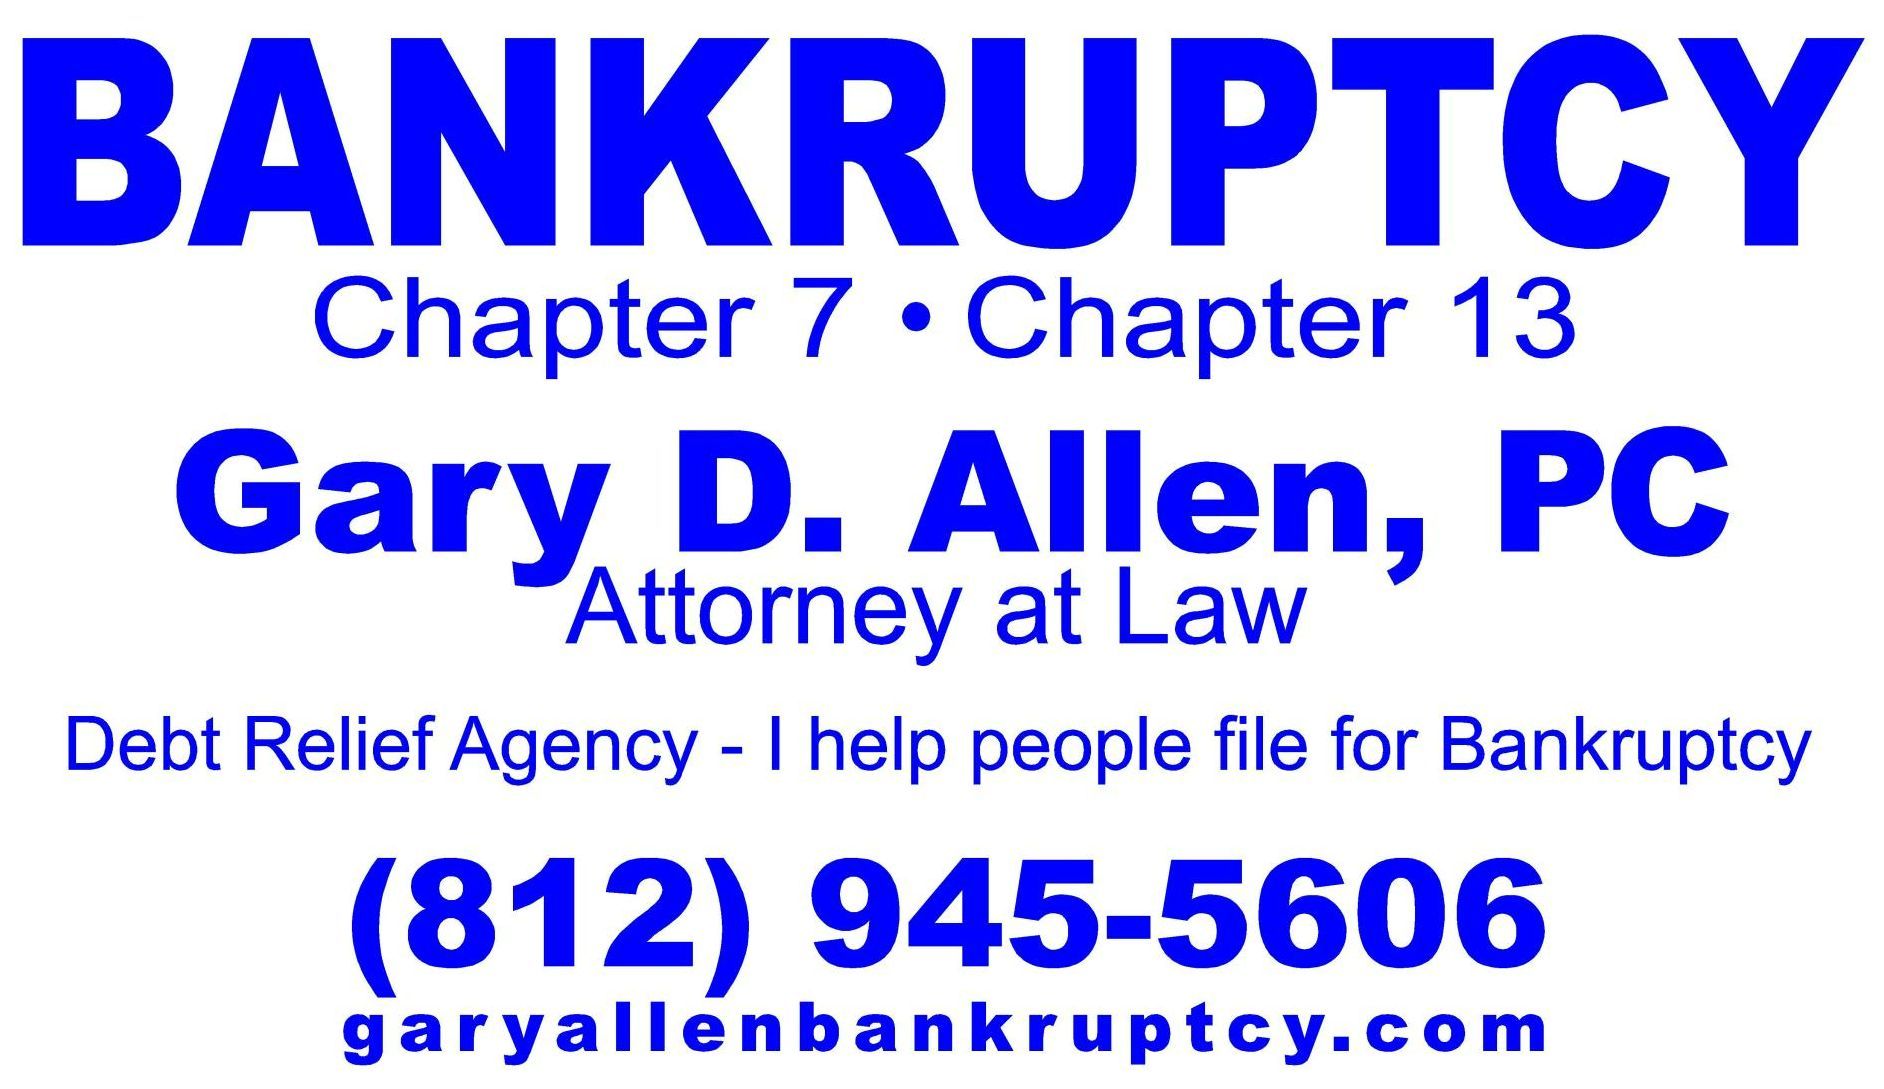 Bankruptcy chapter 7 chapter 13 gary d allen pc attorney at law